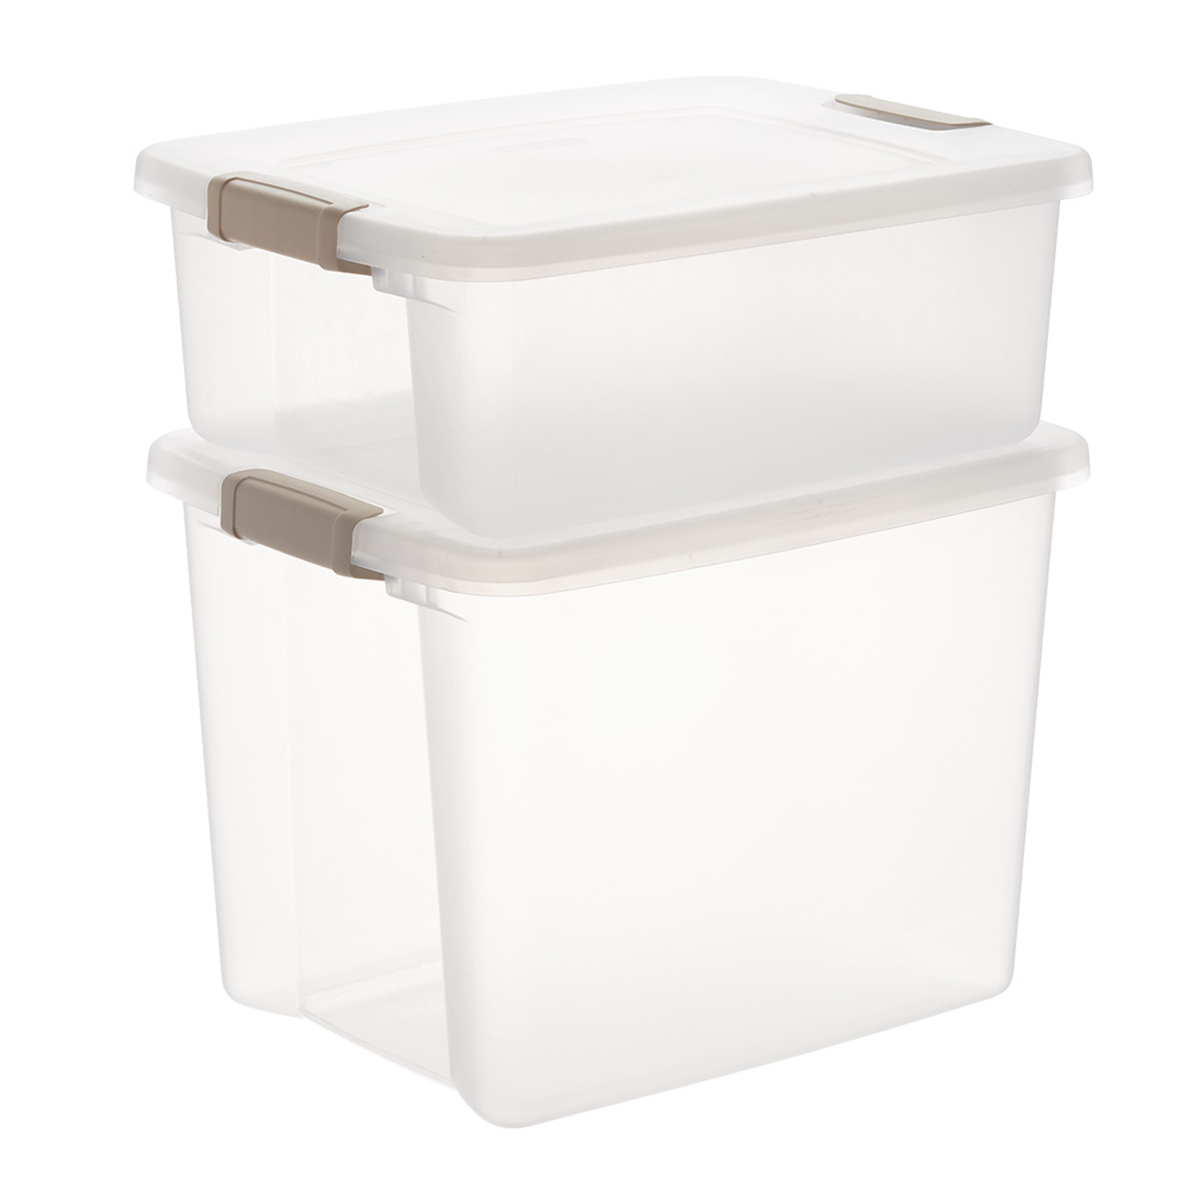 https://www.containerstore.com/catalogimages/365781/10048967g-garage-tote.jpg